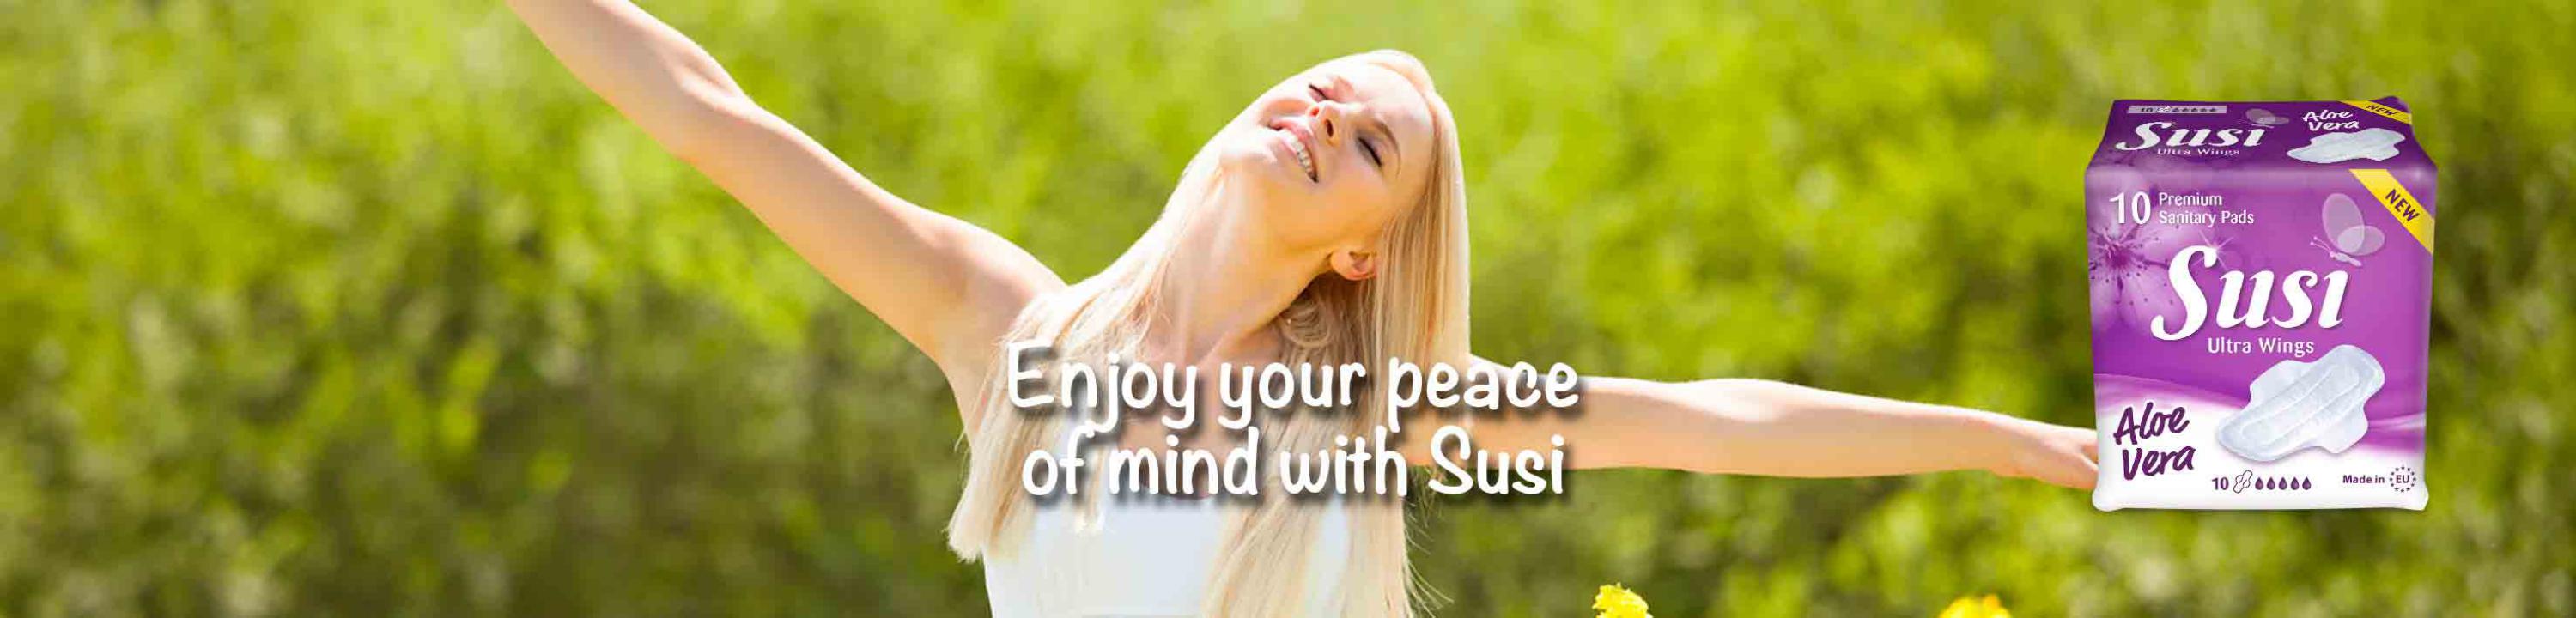 Enjoy your peace of mind with Susi